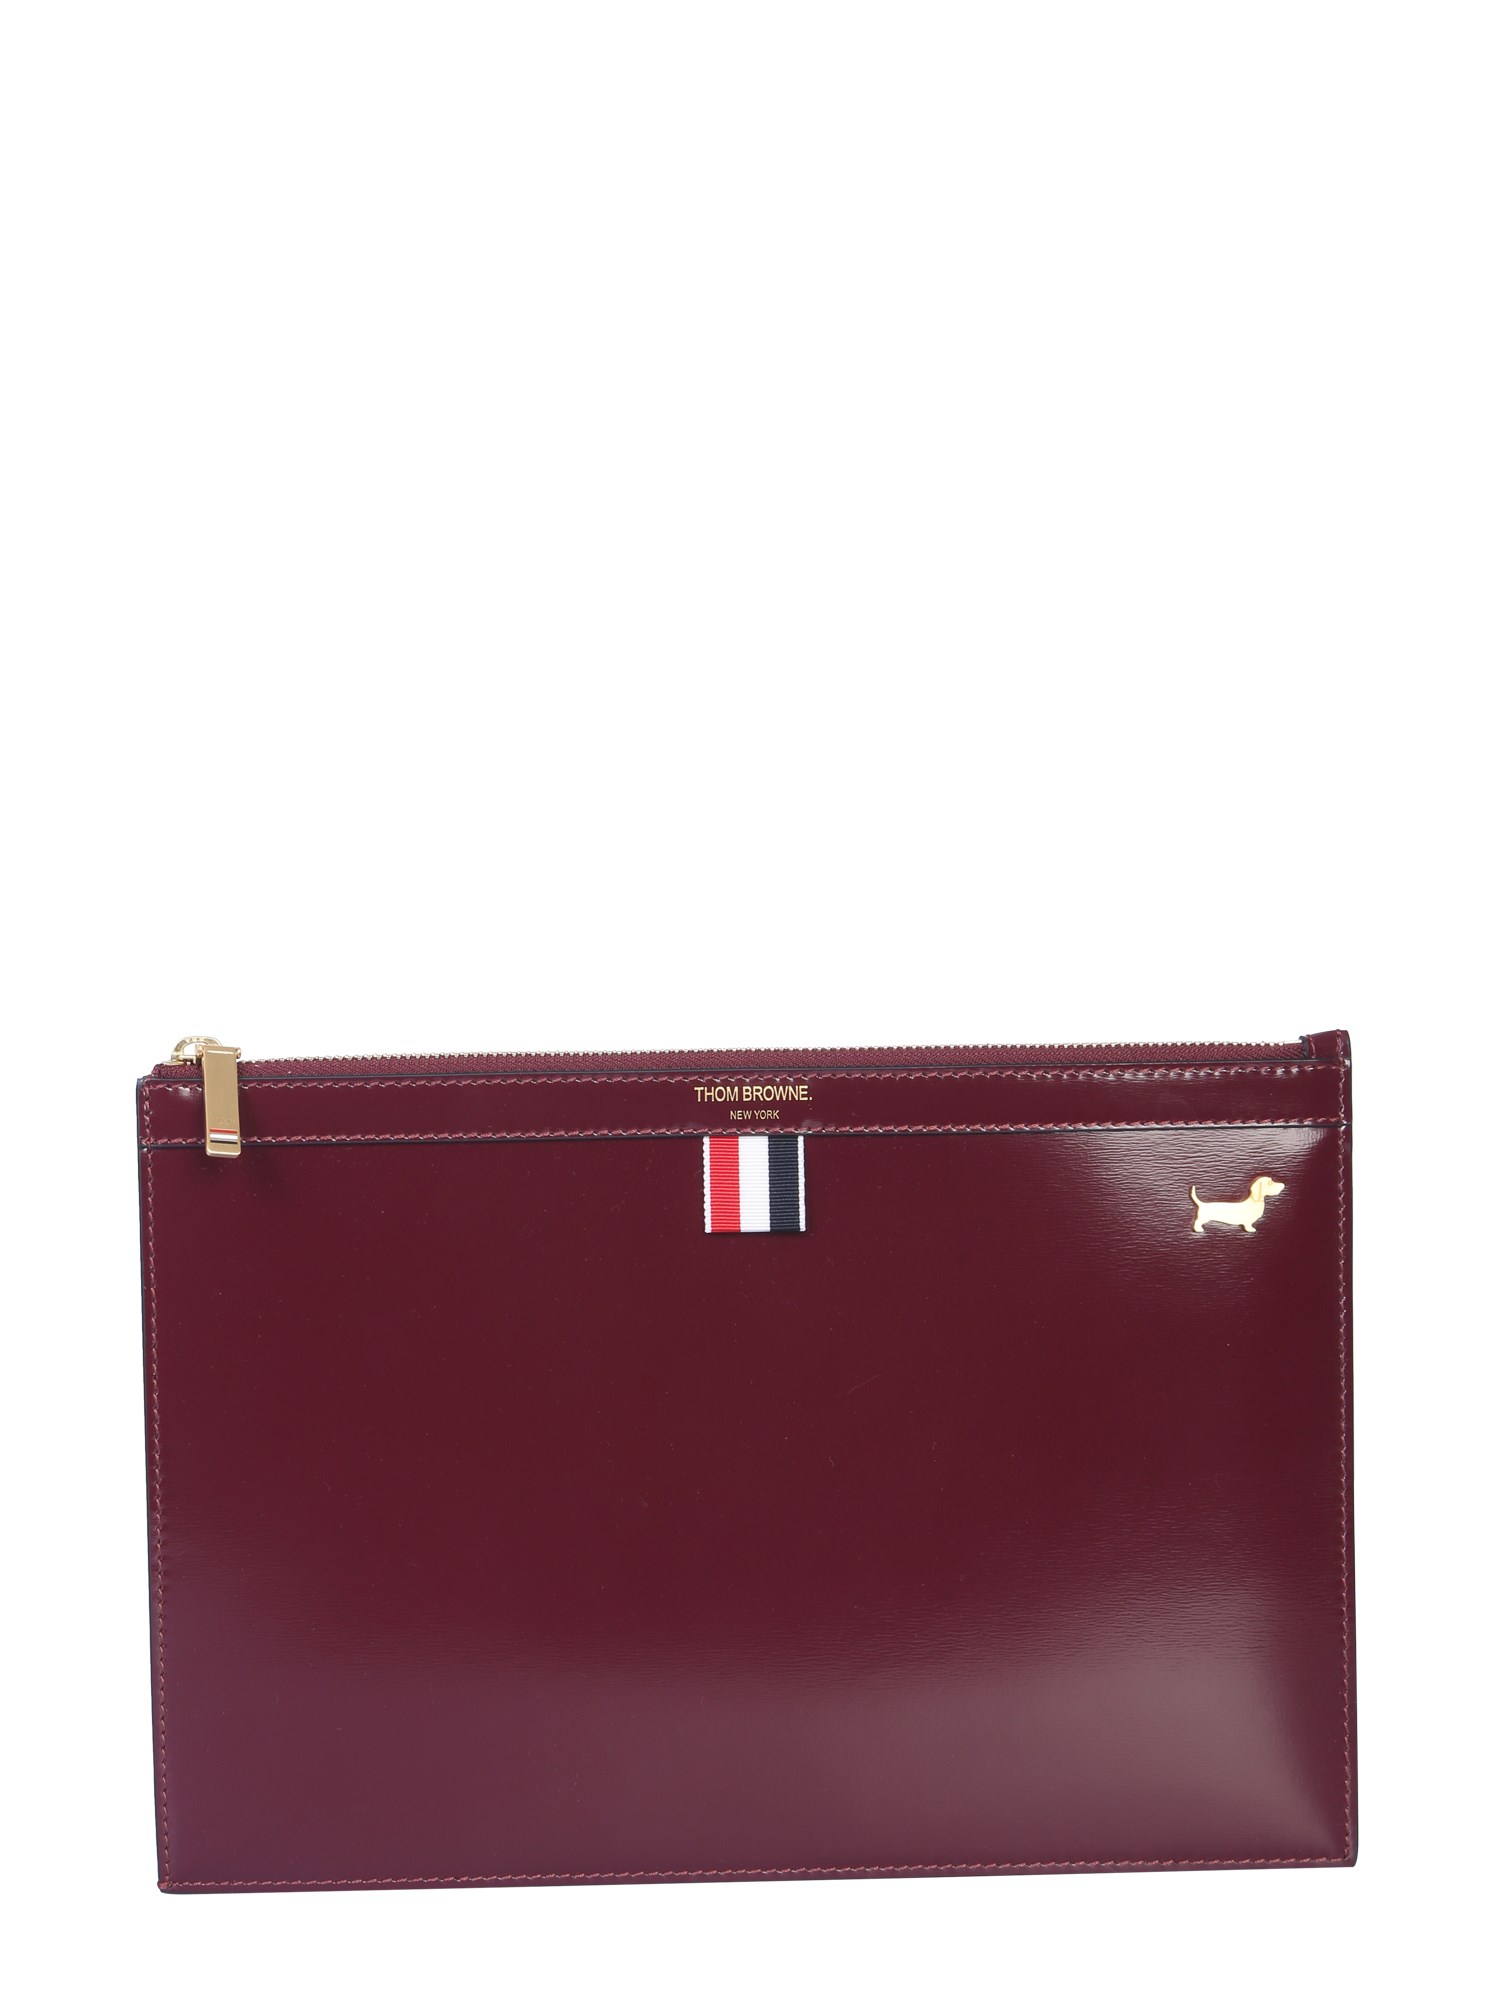 Thom Browne Small Clutch In Bordeaux